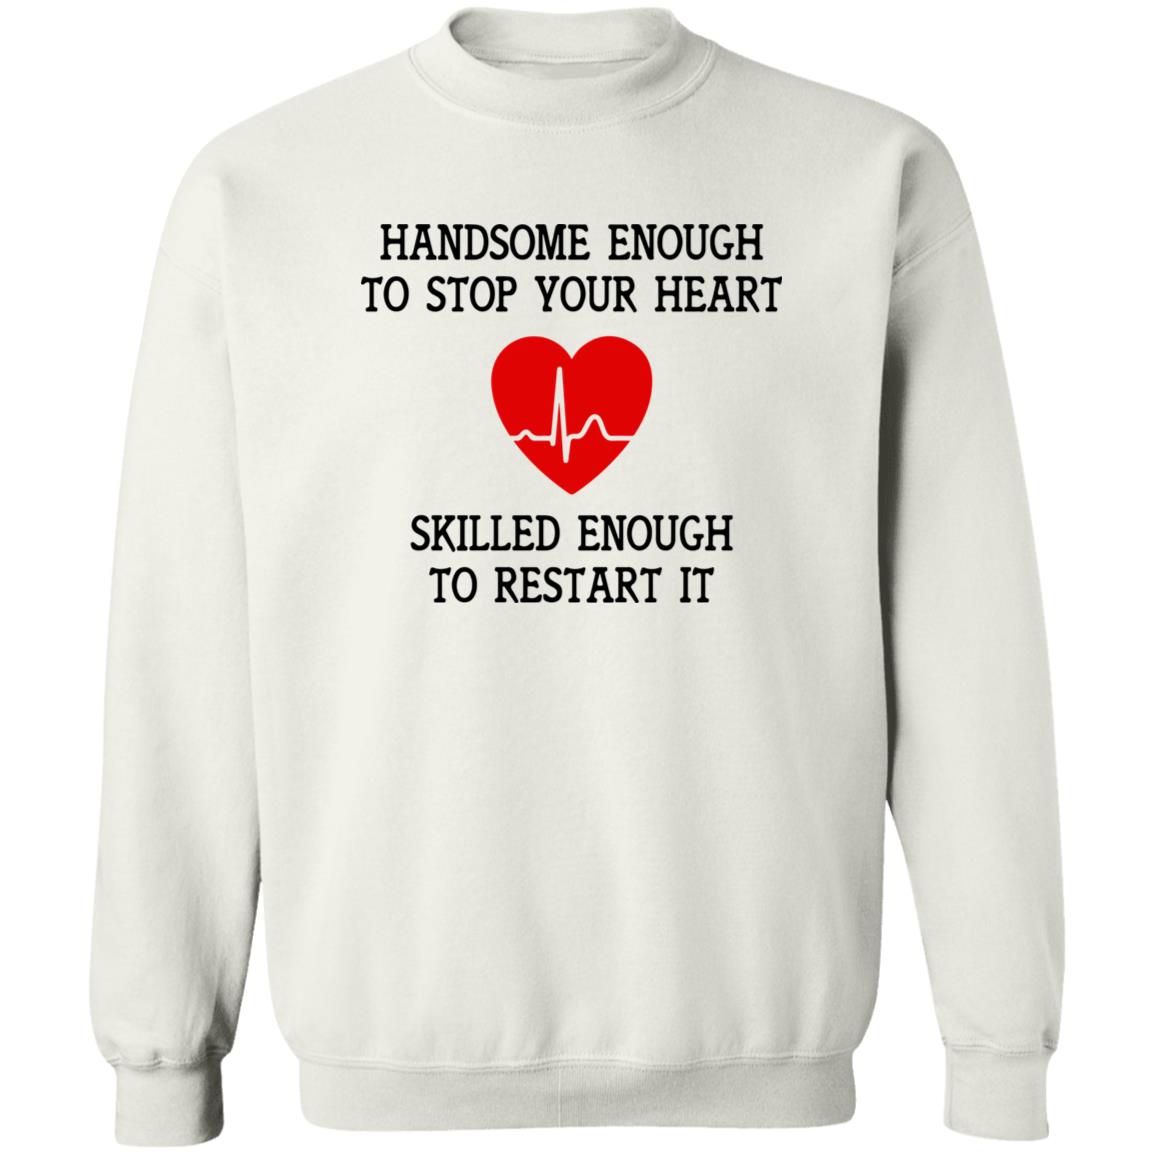 Handsome Enough To Stop Your Heart Sweatshirt